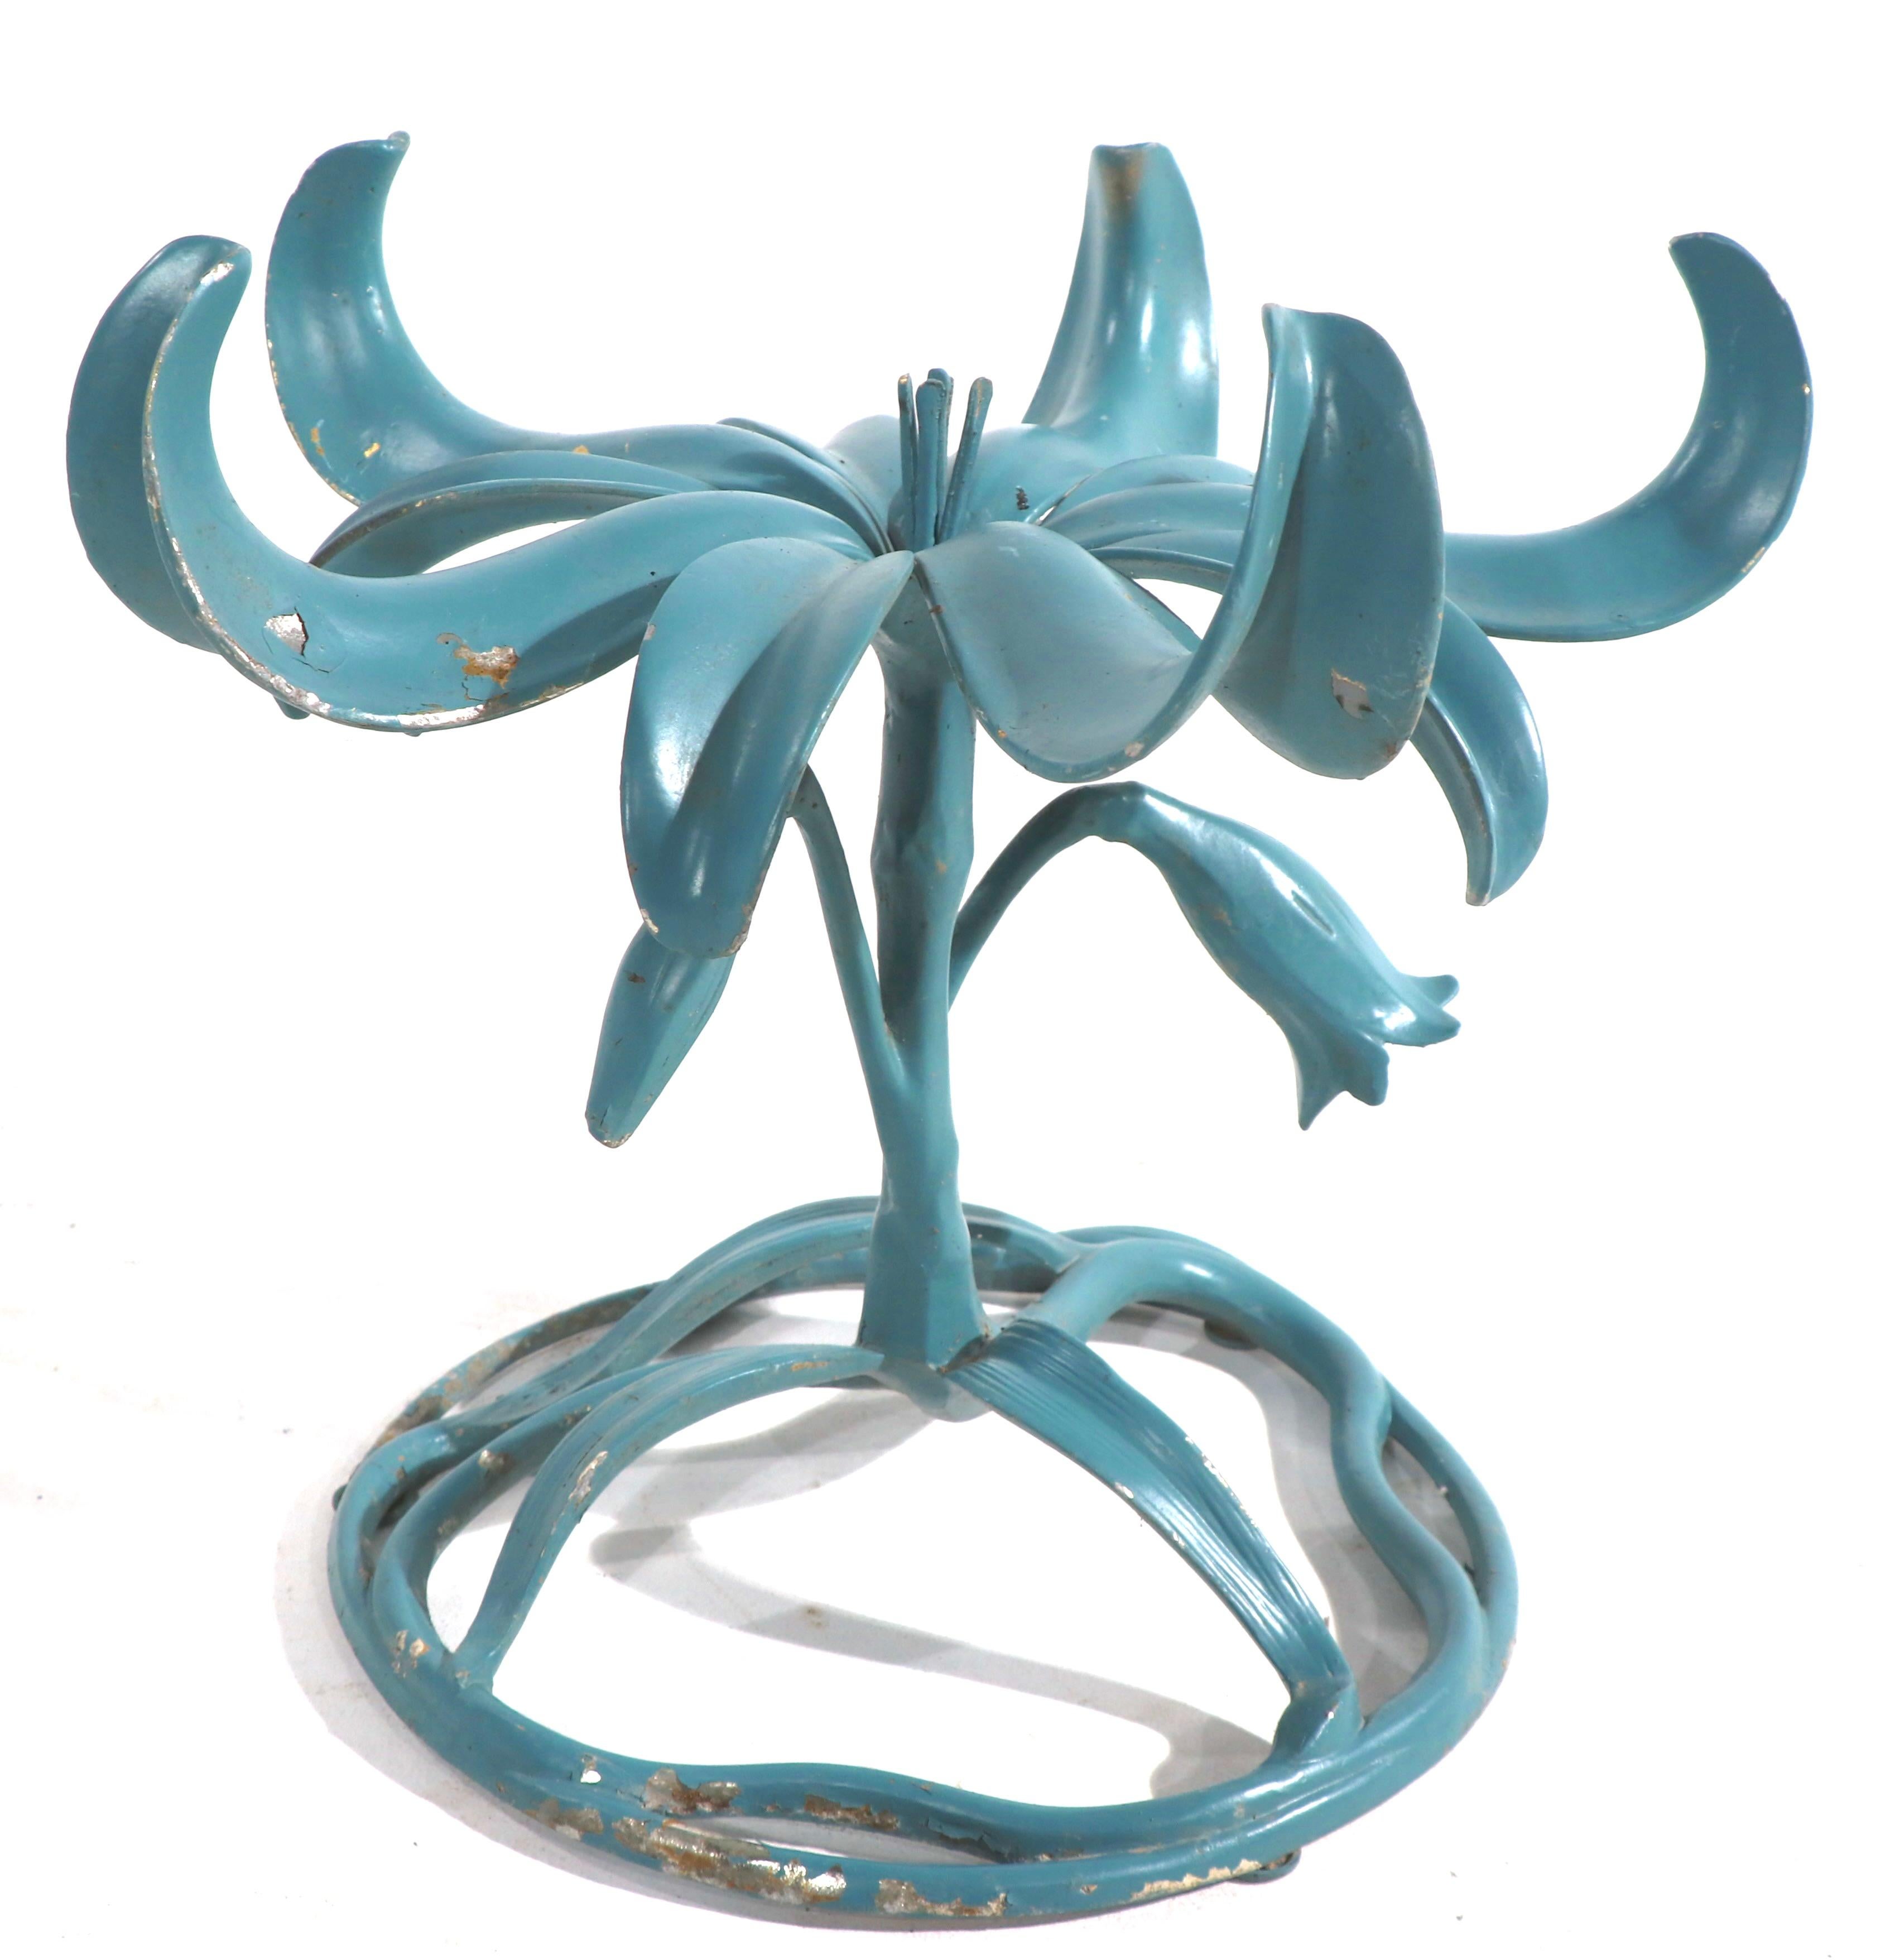 Pair of Arthur Court Lilly flower table bases in later turquoise paint finish. The bases are made of cast aluminum, both are in good condition, some missing stamens - please see images. Offering these as a pair, no glass tops included. Replace the